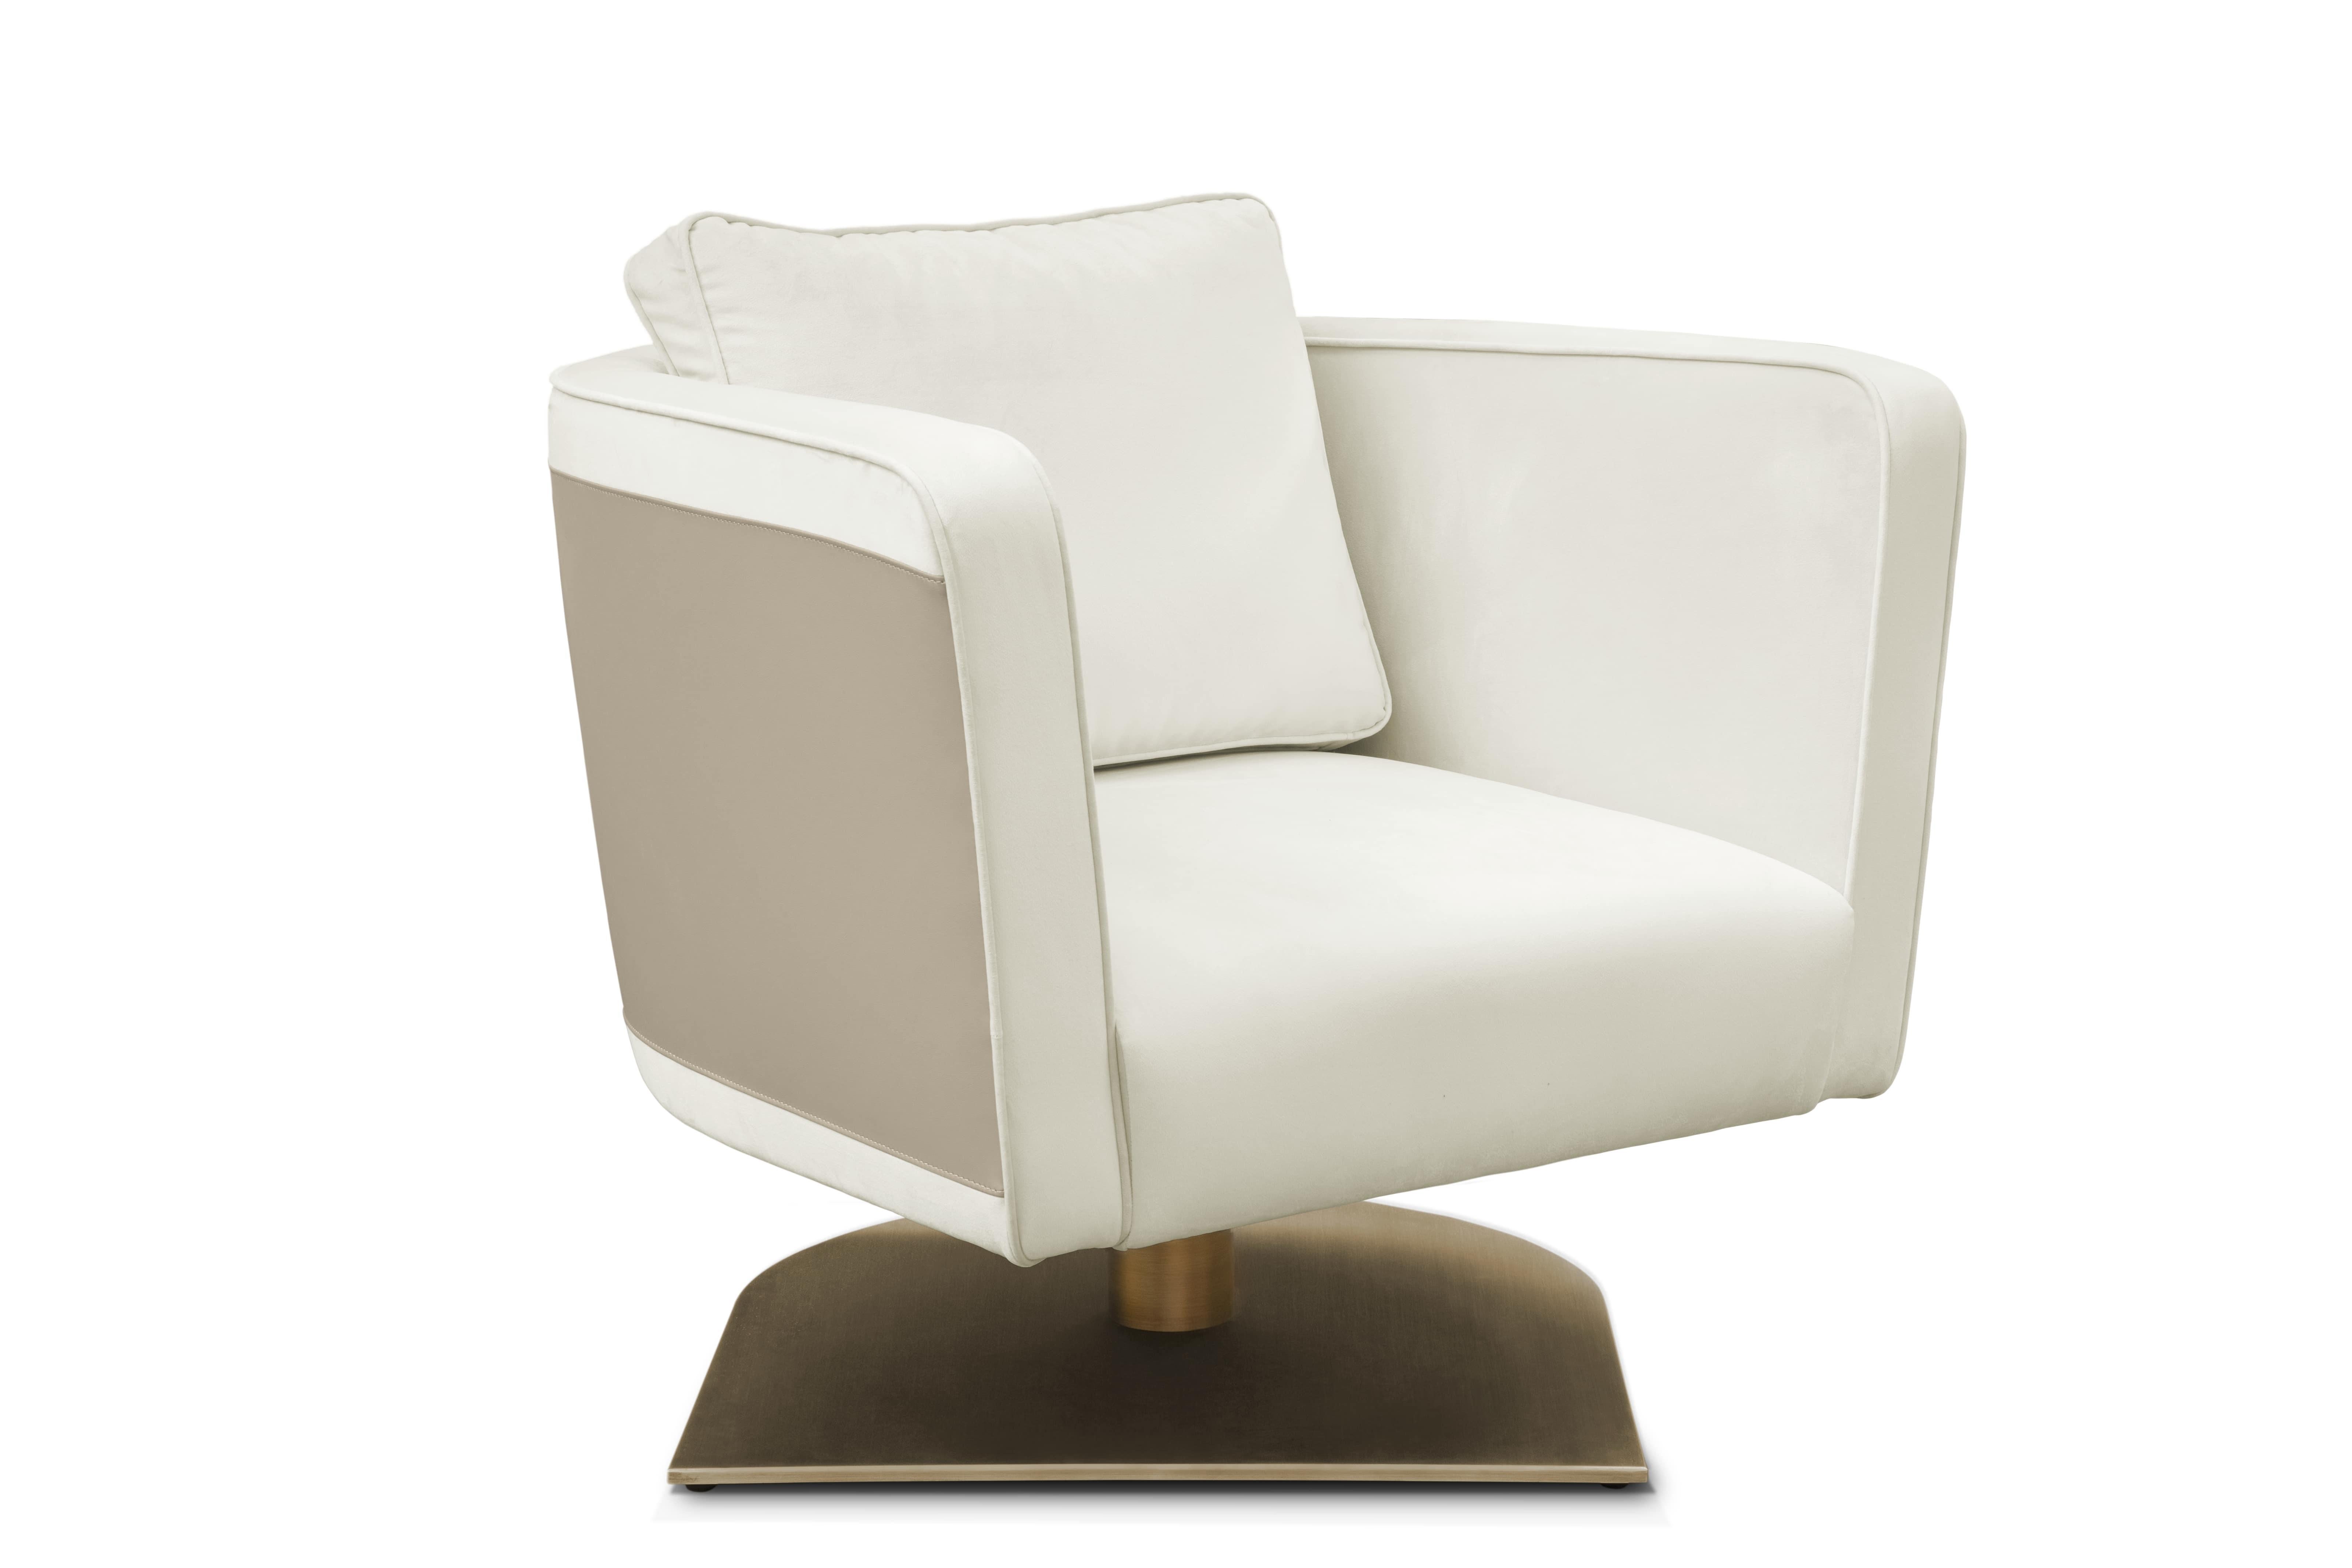 This Contemporary Modern Evaluna Velvet and Bronze Brass Armchair by Caffe Latte, with a wide and elegant foot, perfectly complements the design of the upholstery used in the arms, seating, and back. Made with velvet and bronze brass, althought it